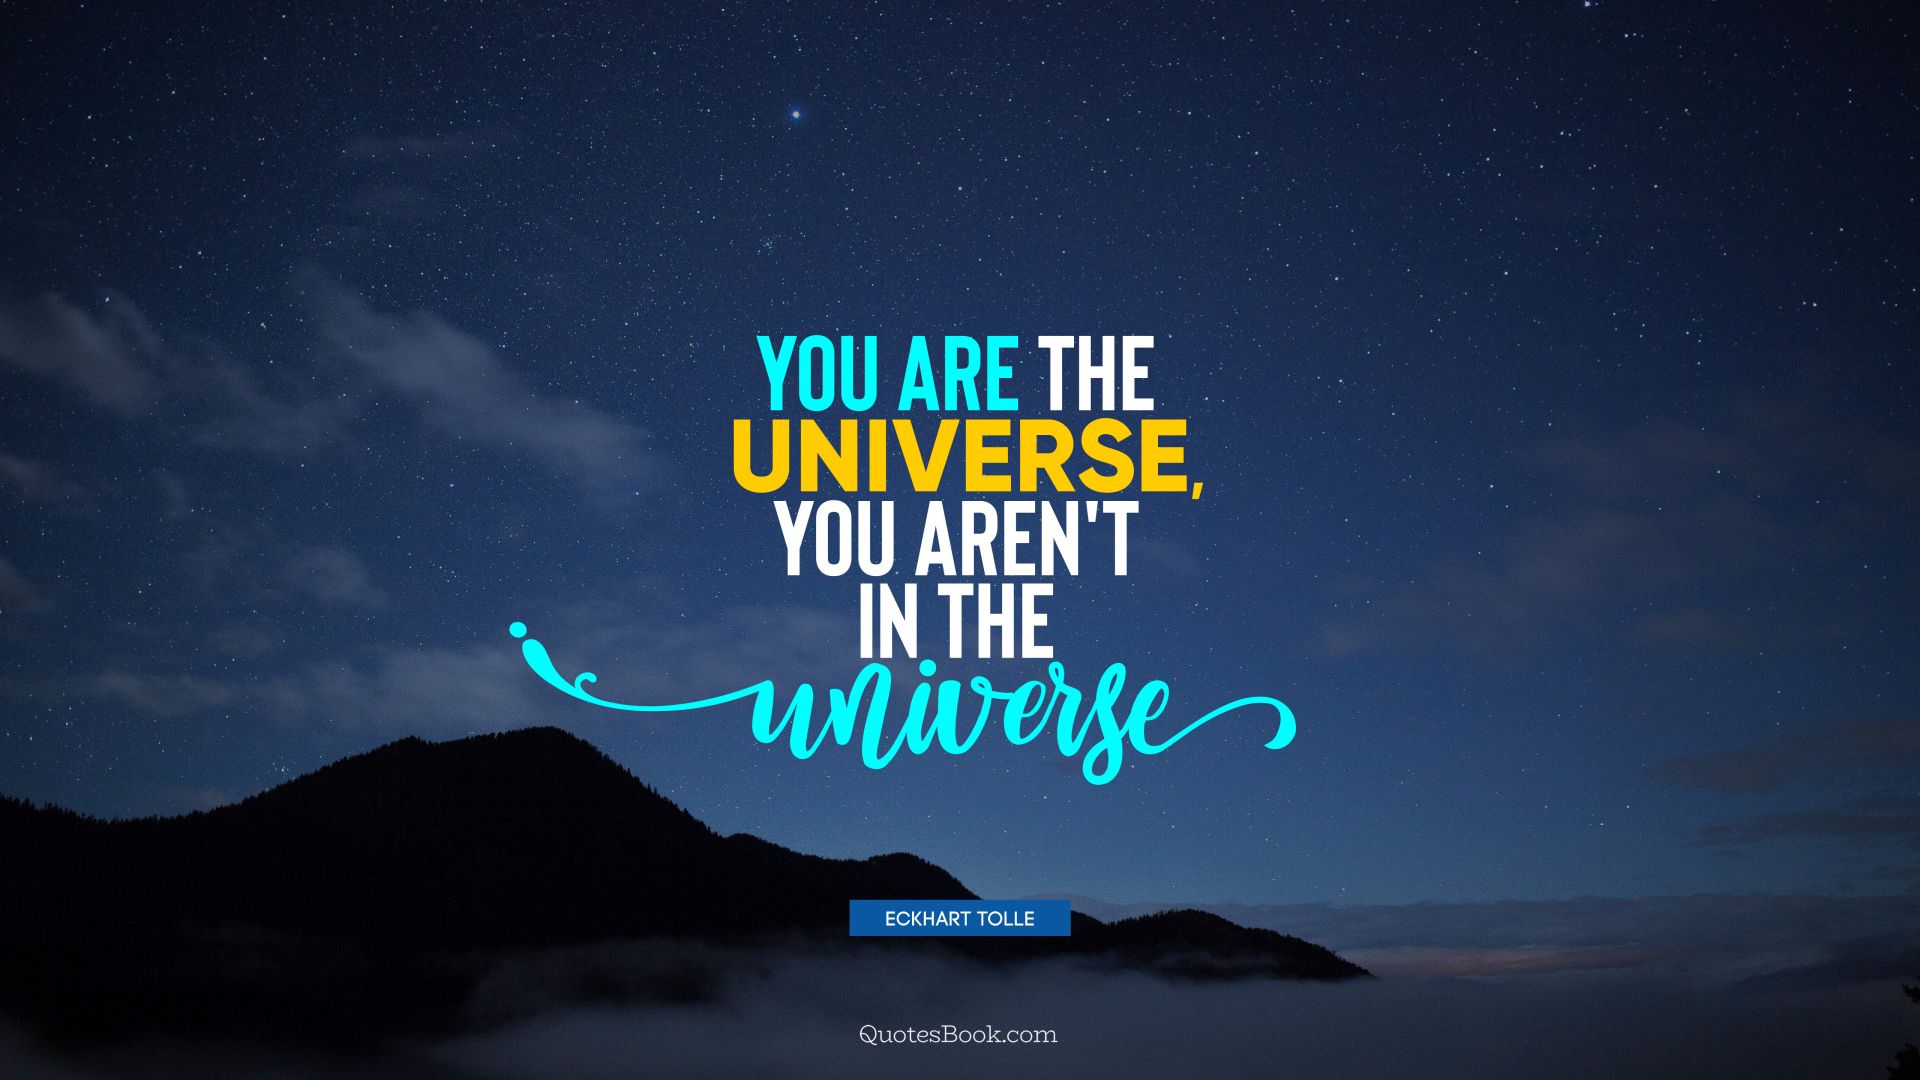 You are the universe, you aren't in the universe. - Quote by Eckhart